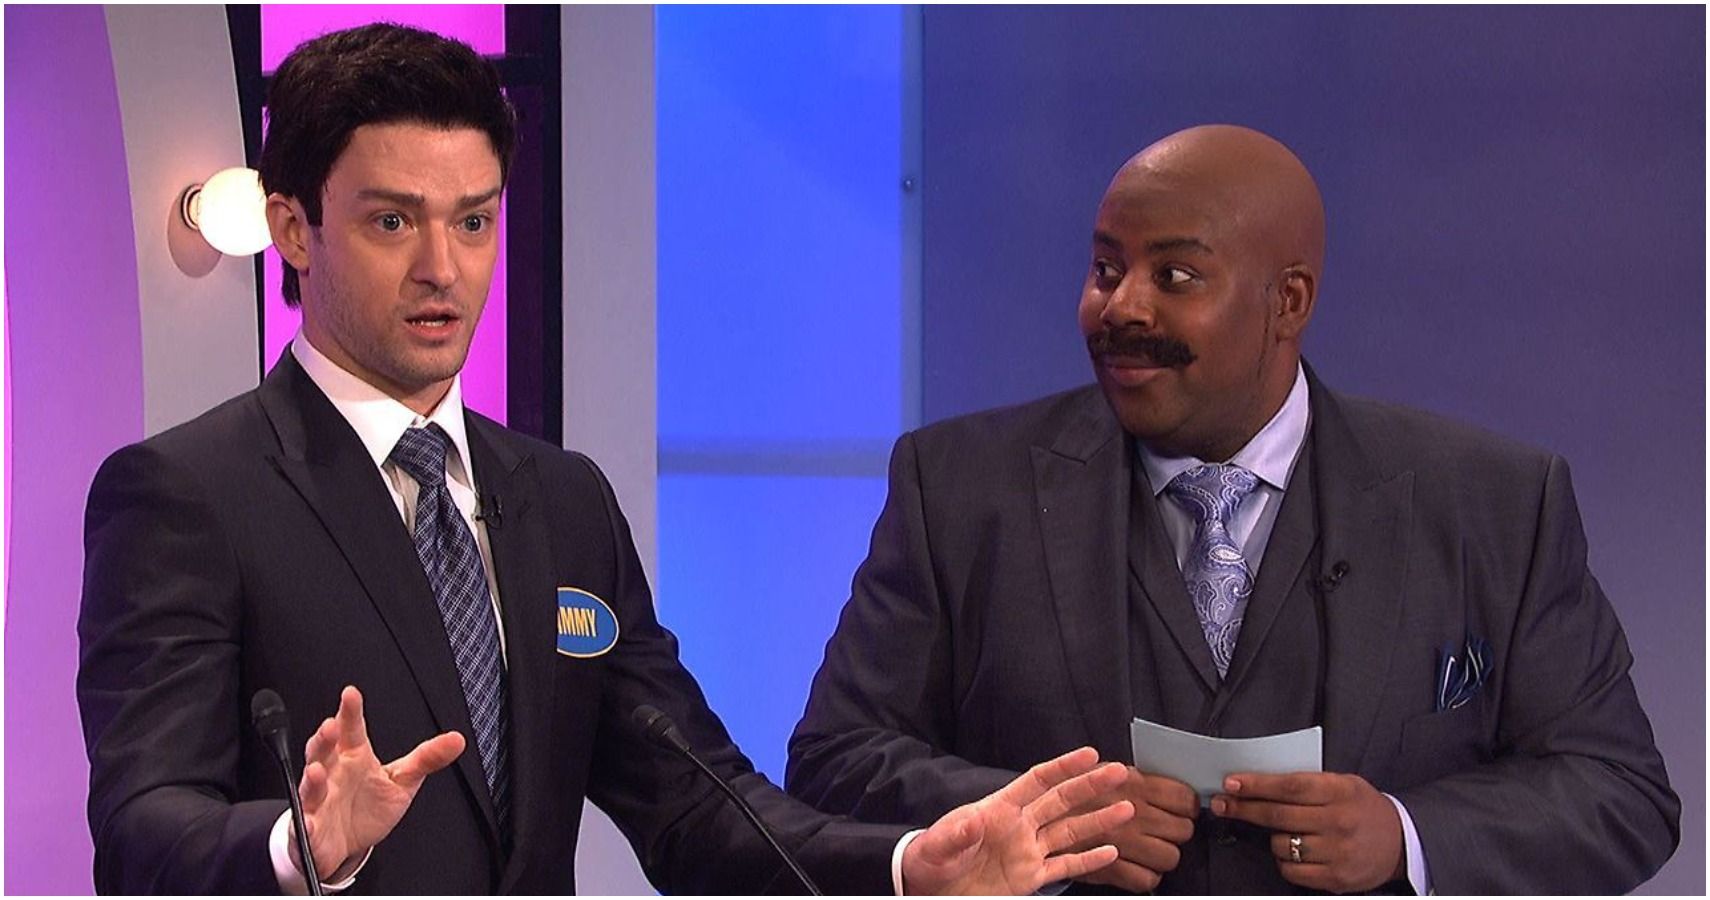 A screenshot of Justin Timberlake as Jimmy Fallon and Kenan Thompson as Steve Harvey in the 